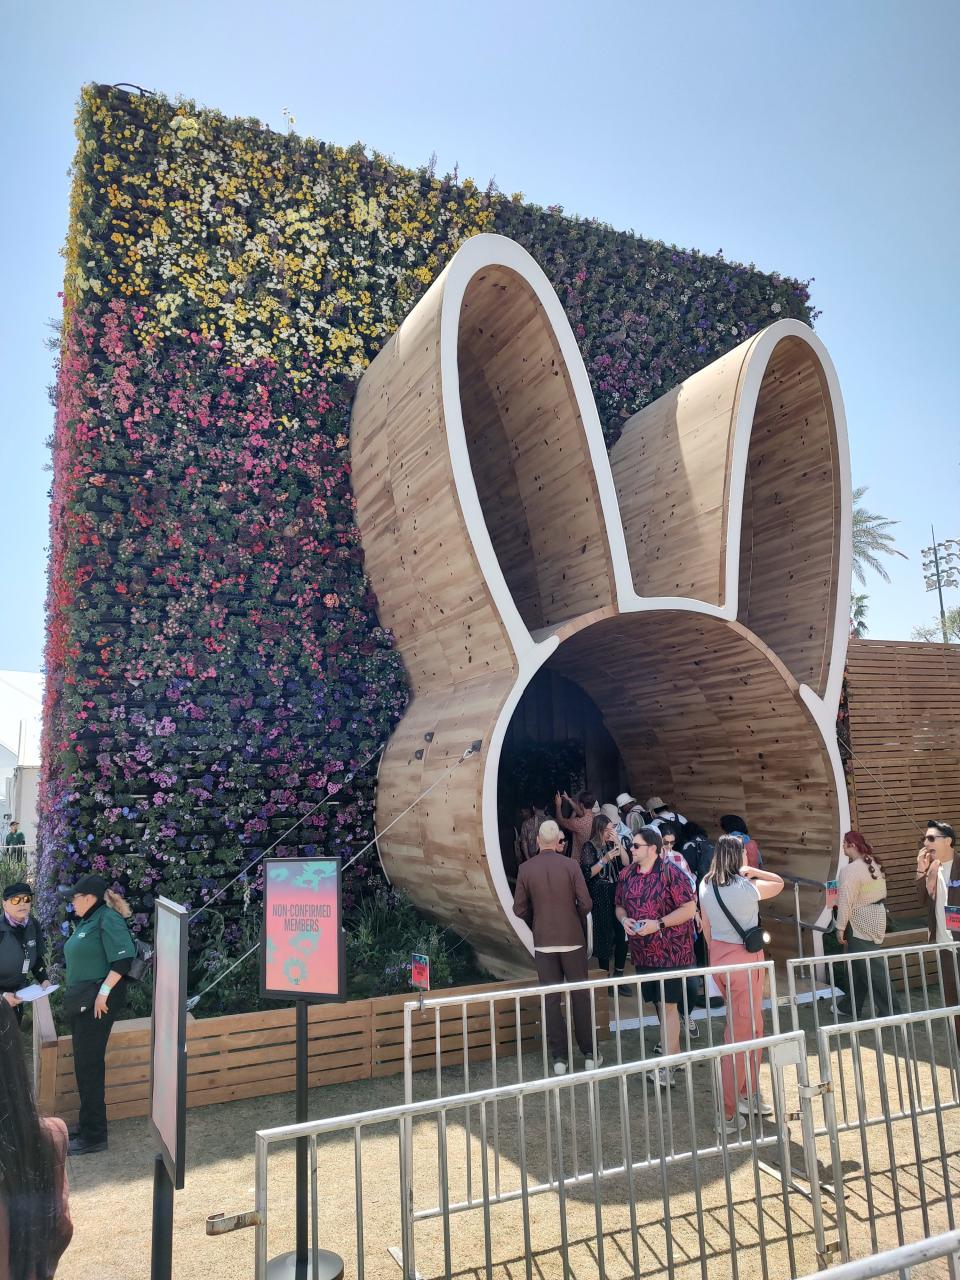 The Adidas flower cube structure at the 2023 Coachella Valley Music and Arts Festival in Indio, Calif., was a hit with Instagram hounds. The bunny-ears shaped entrance was a nod to headliner Bad Bunny.